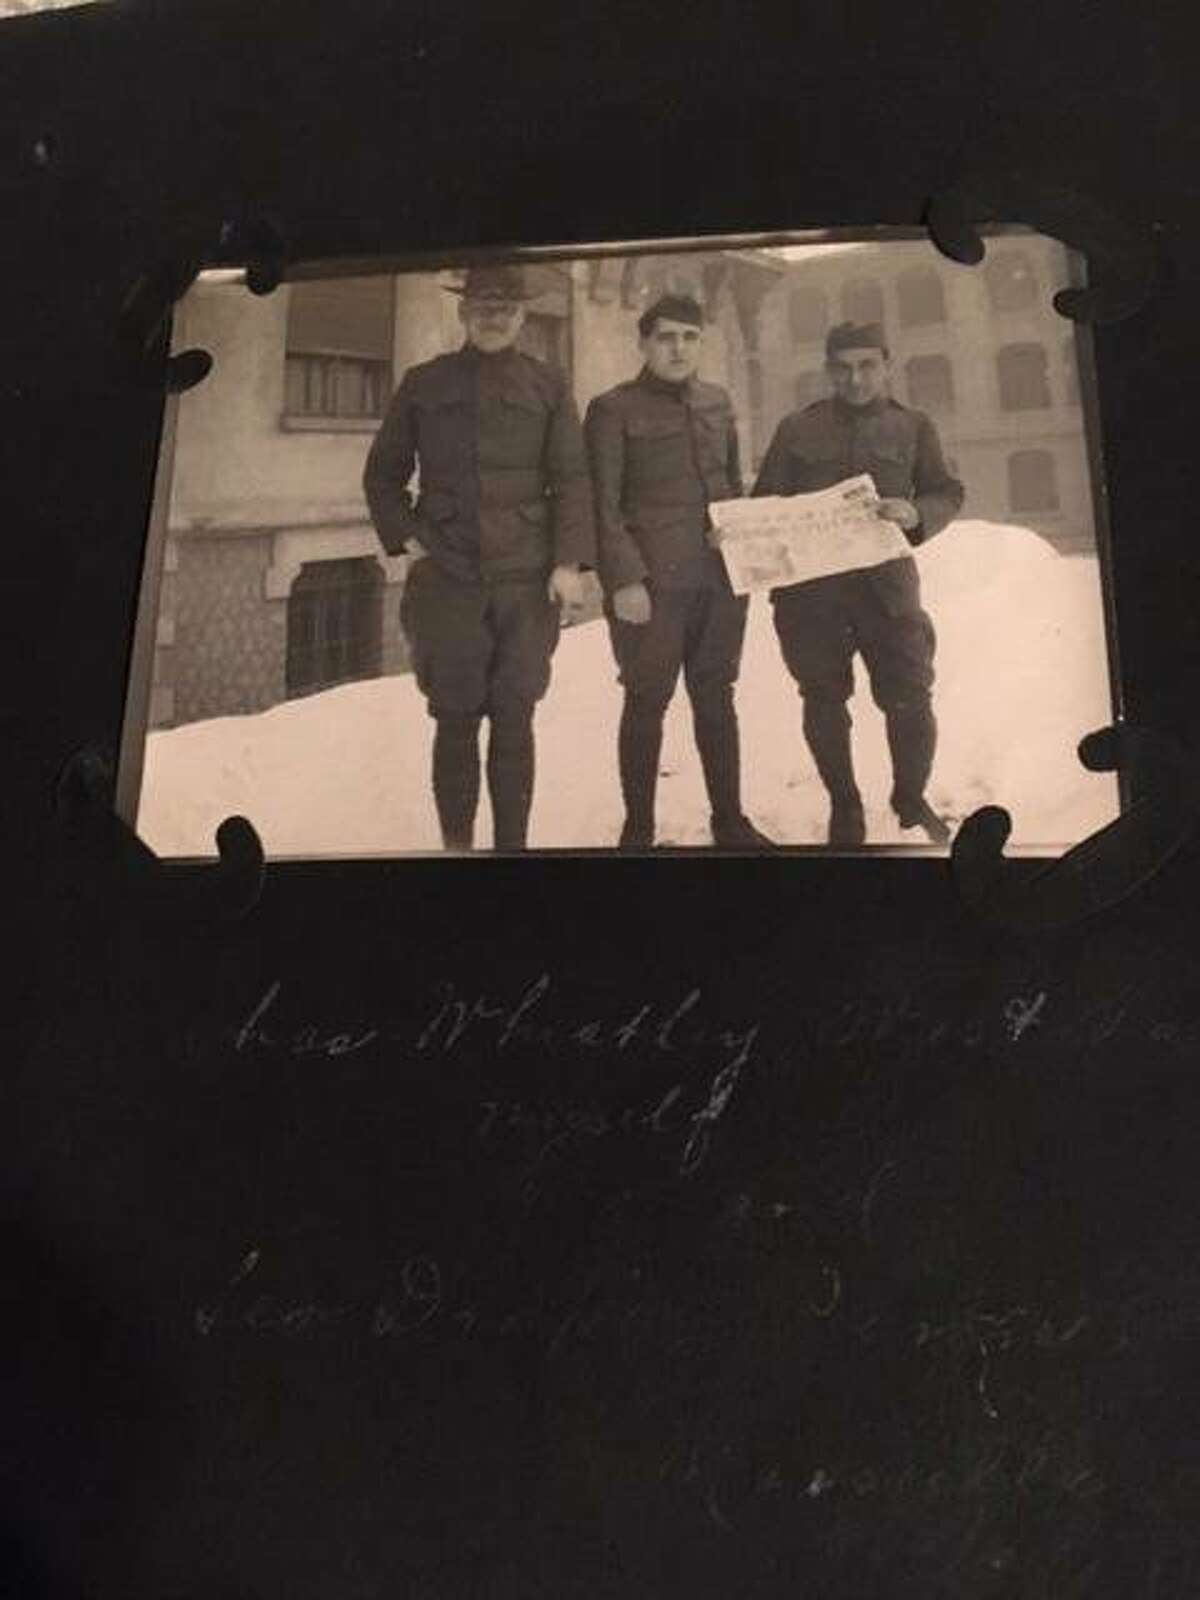 San Francisco soldier Joseph Bosque, center, is seen with two of his mates while deployed in France during WW I. While deployed, Bosque wrote a series of love letters to his then-girlfriend, Annie Corbett, who awaited his return in San Francisco from the war. Bosque was deployed in a non-combat role and returned home safely to marry his sweetheart.